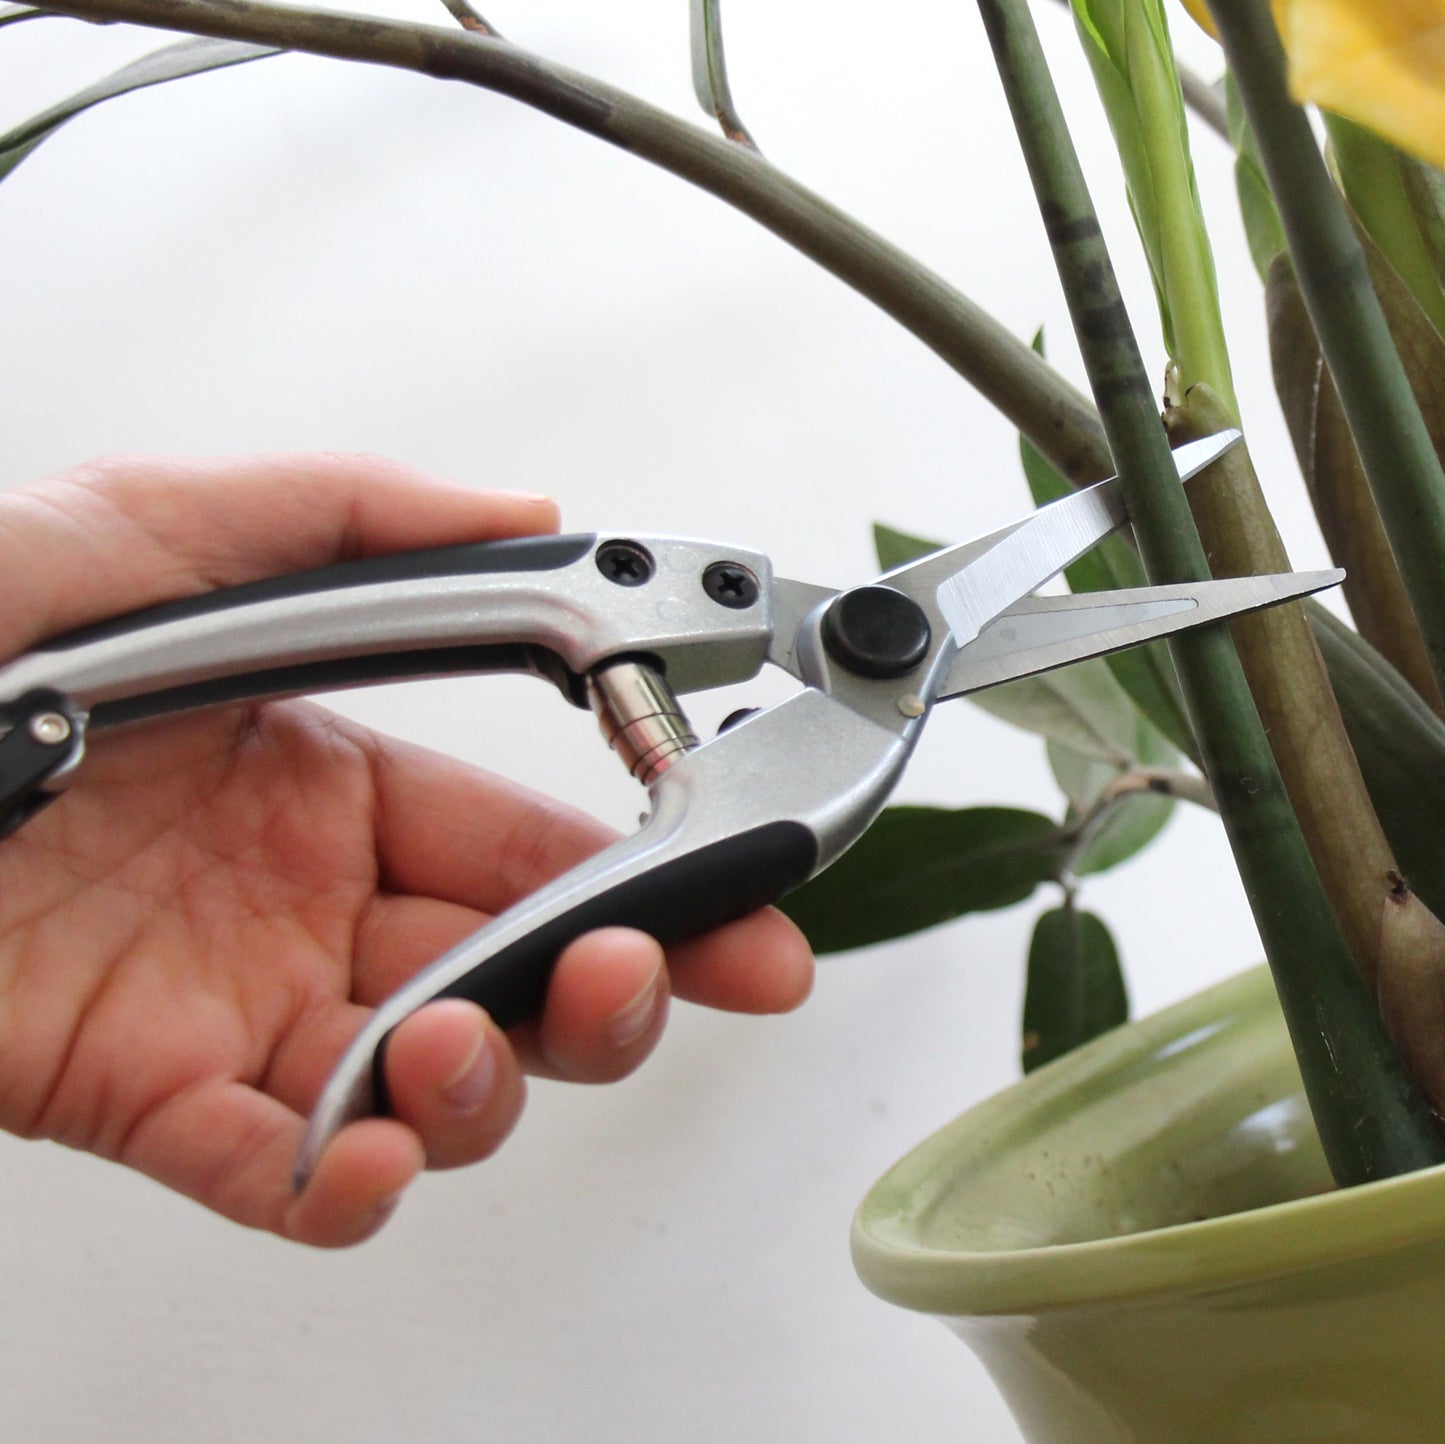 TABOR TOOLS K18A Soft-Touch Micro-Tip Pruning Snip, Pruning Shears